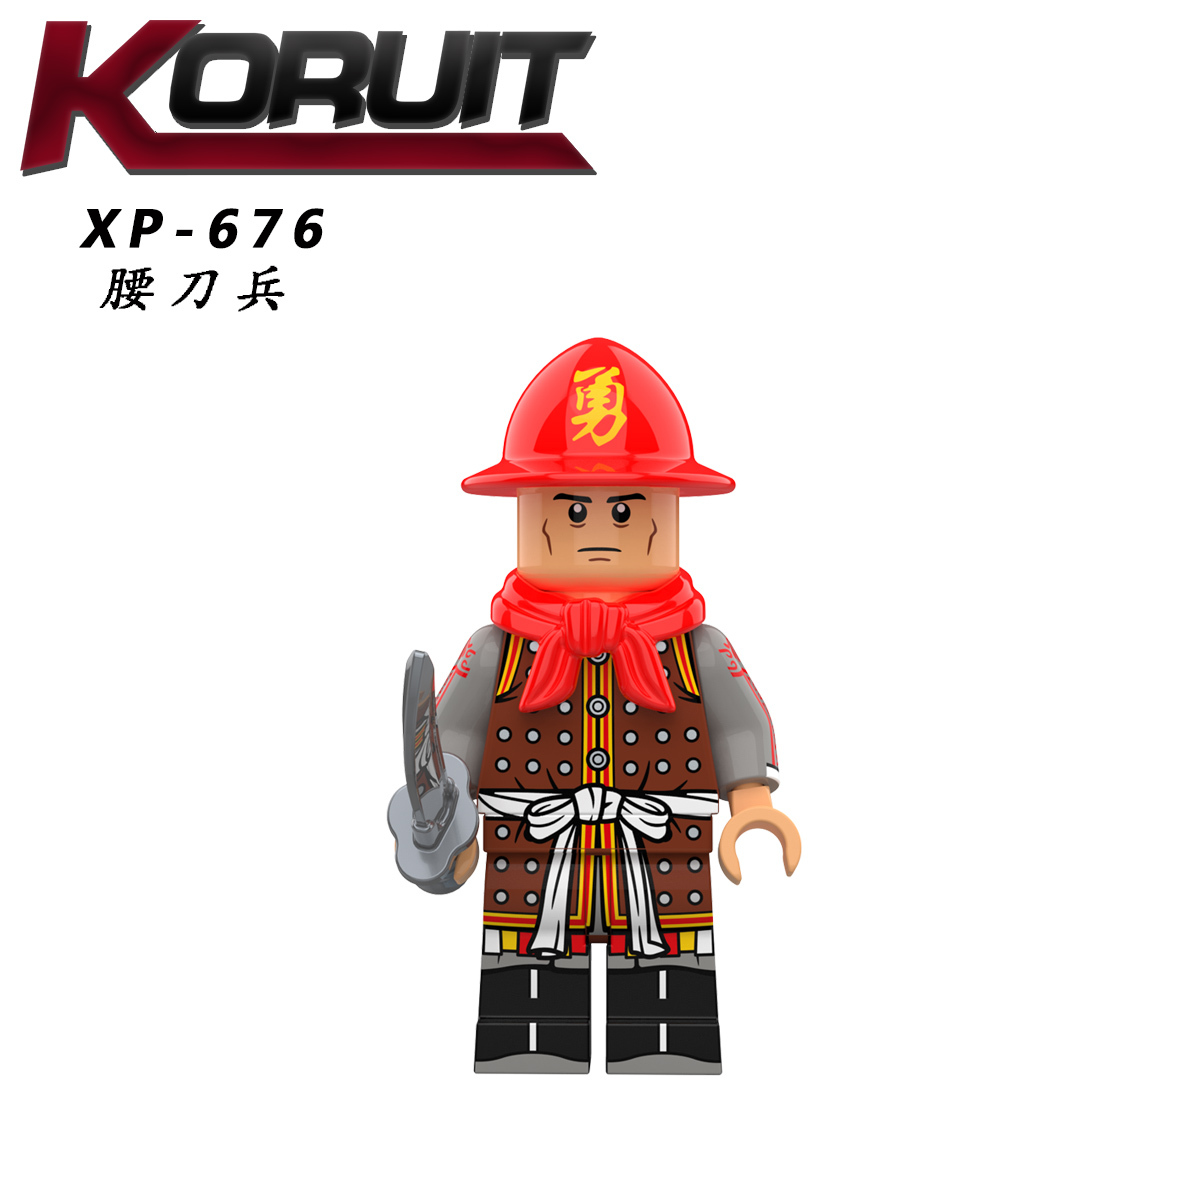 XP672 XP673 XP674 XP675 XP676 XP677 XP678 XP679 XP680 XP681 KT1091 Building Blocks Chinese Ancient Soldier Bricks Action Educational Toys for Kids Gifts 